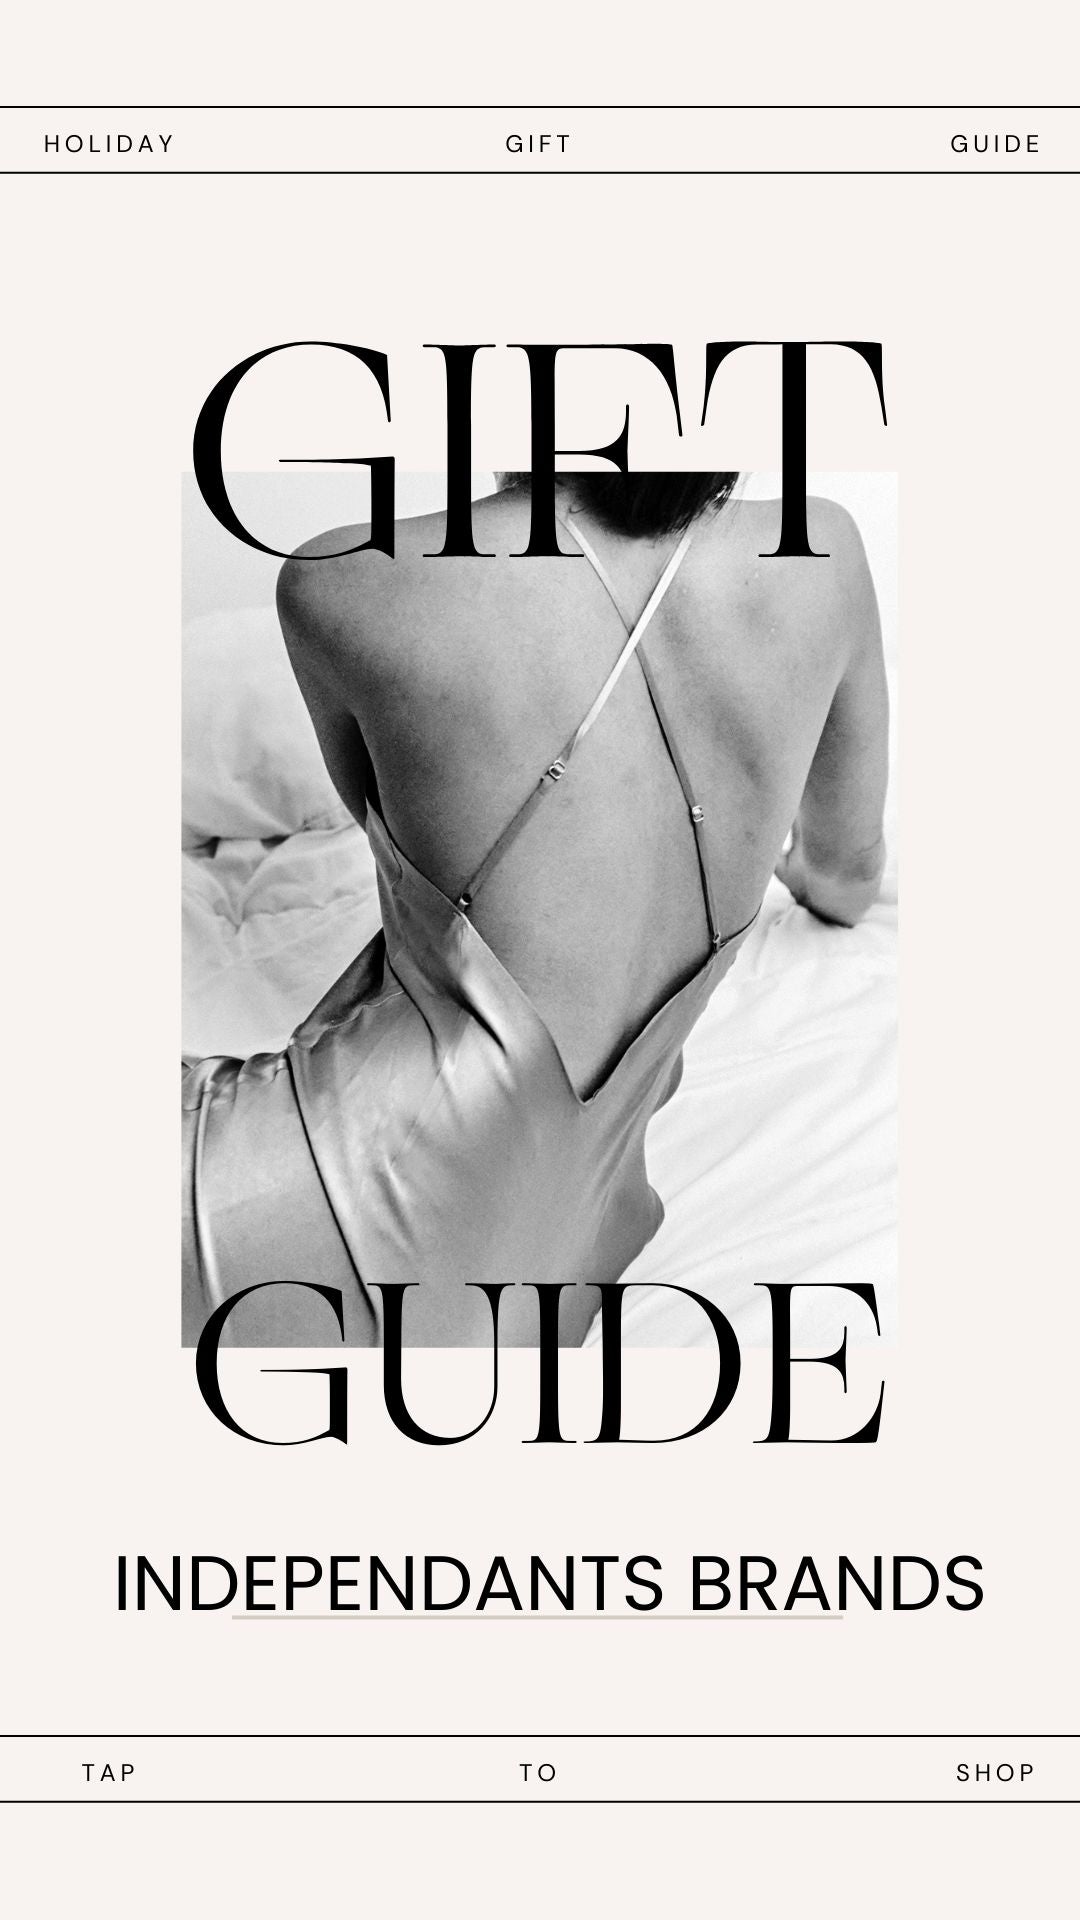 Elevate Your Holiday Gifting: An Independent Brands Gift Guide - Ariane Delarue Lingerie